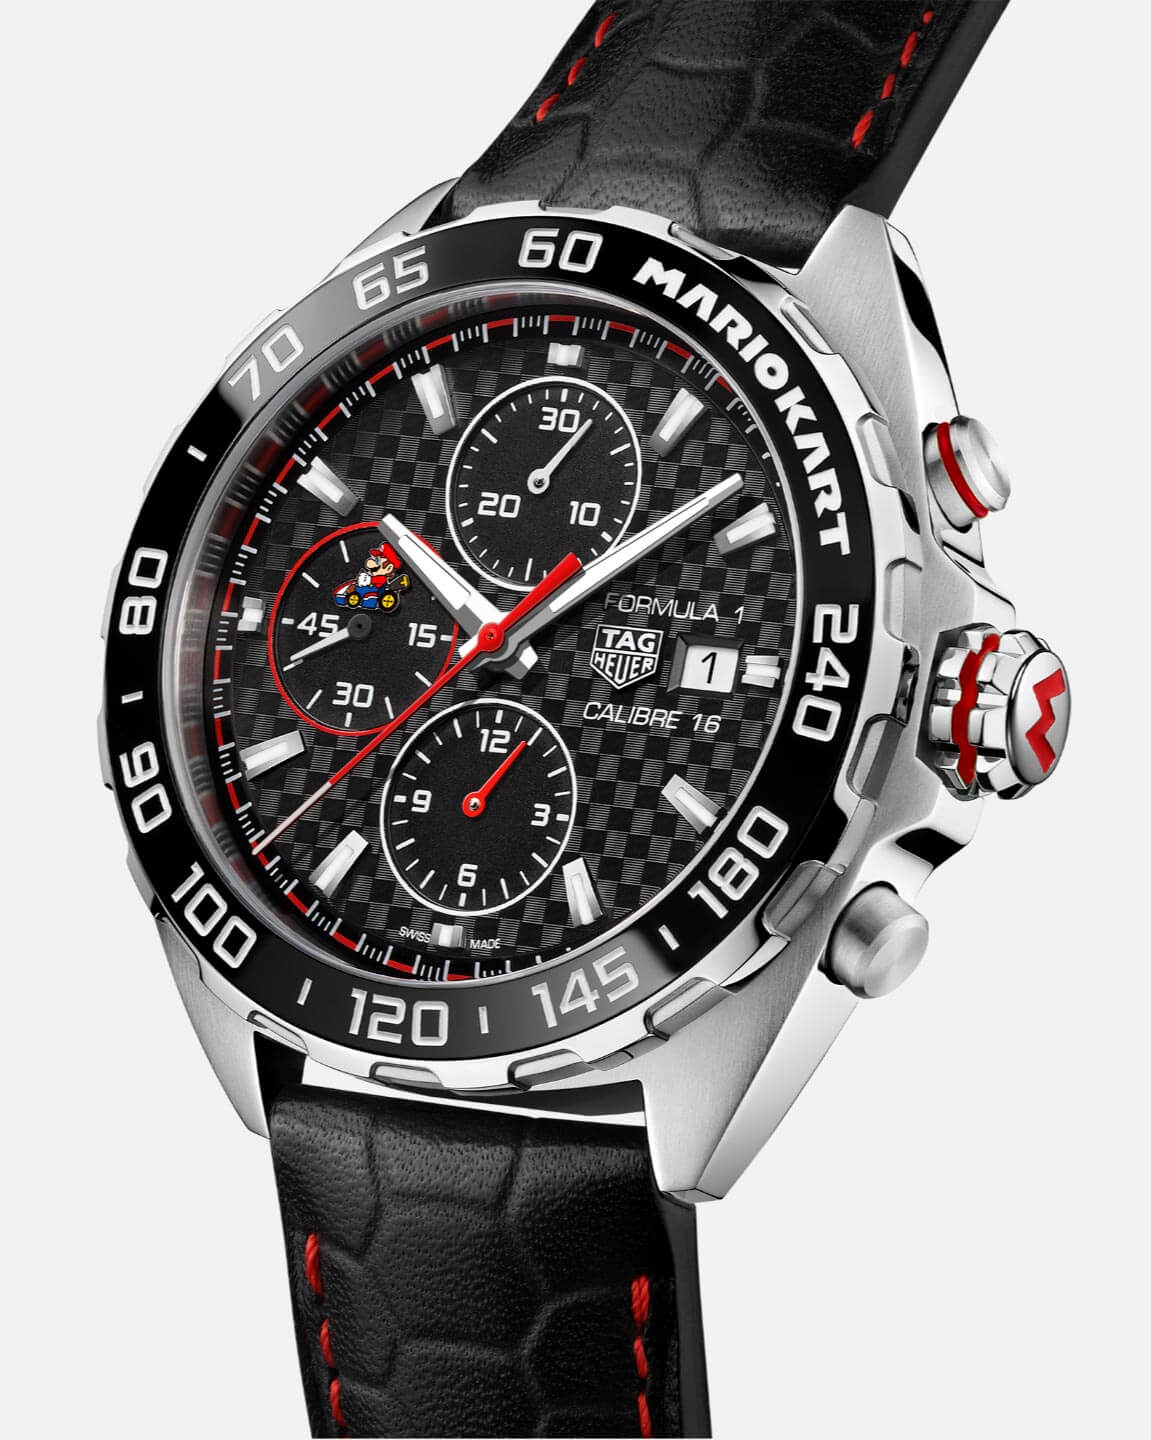 TAG Heuer Formula 1 Watches for Sale - Authenticity Guaranteed 